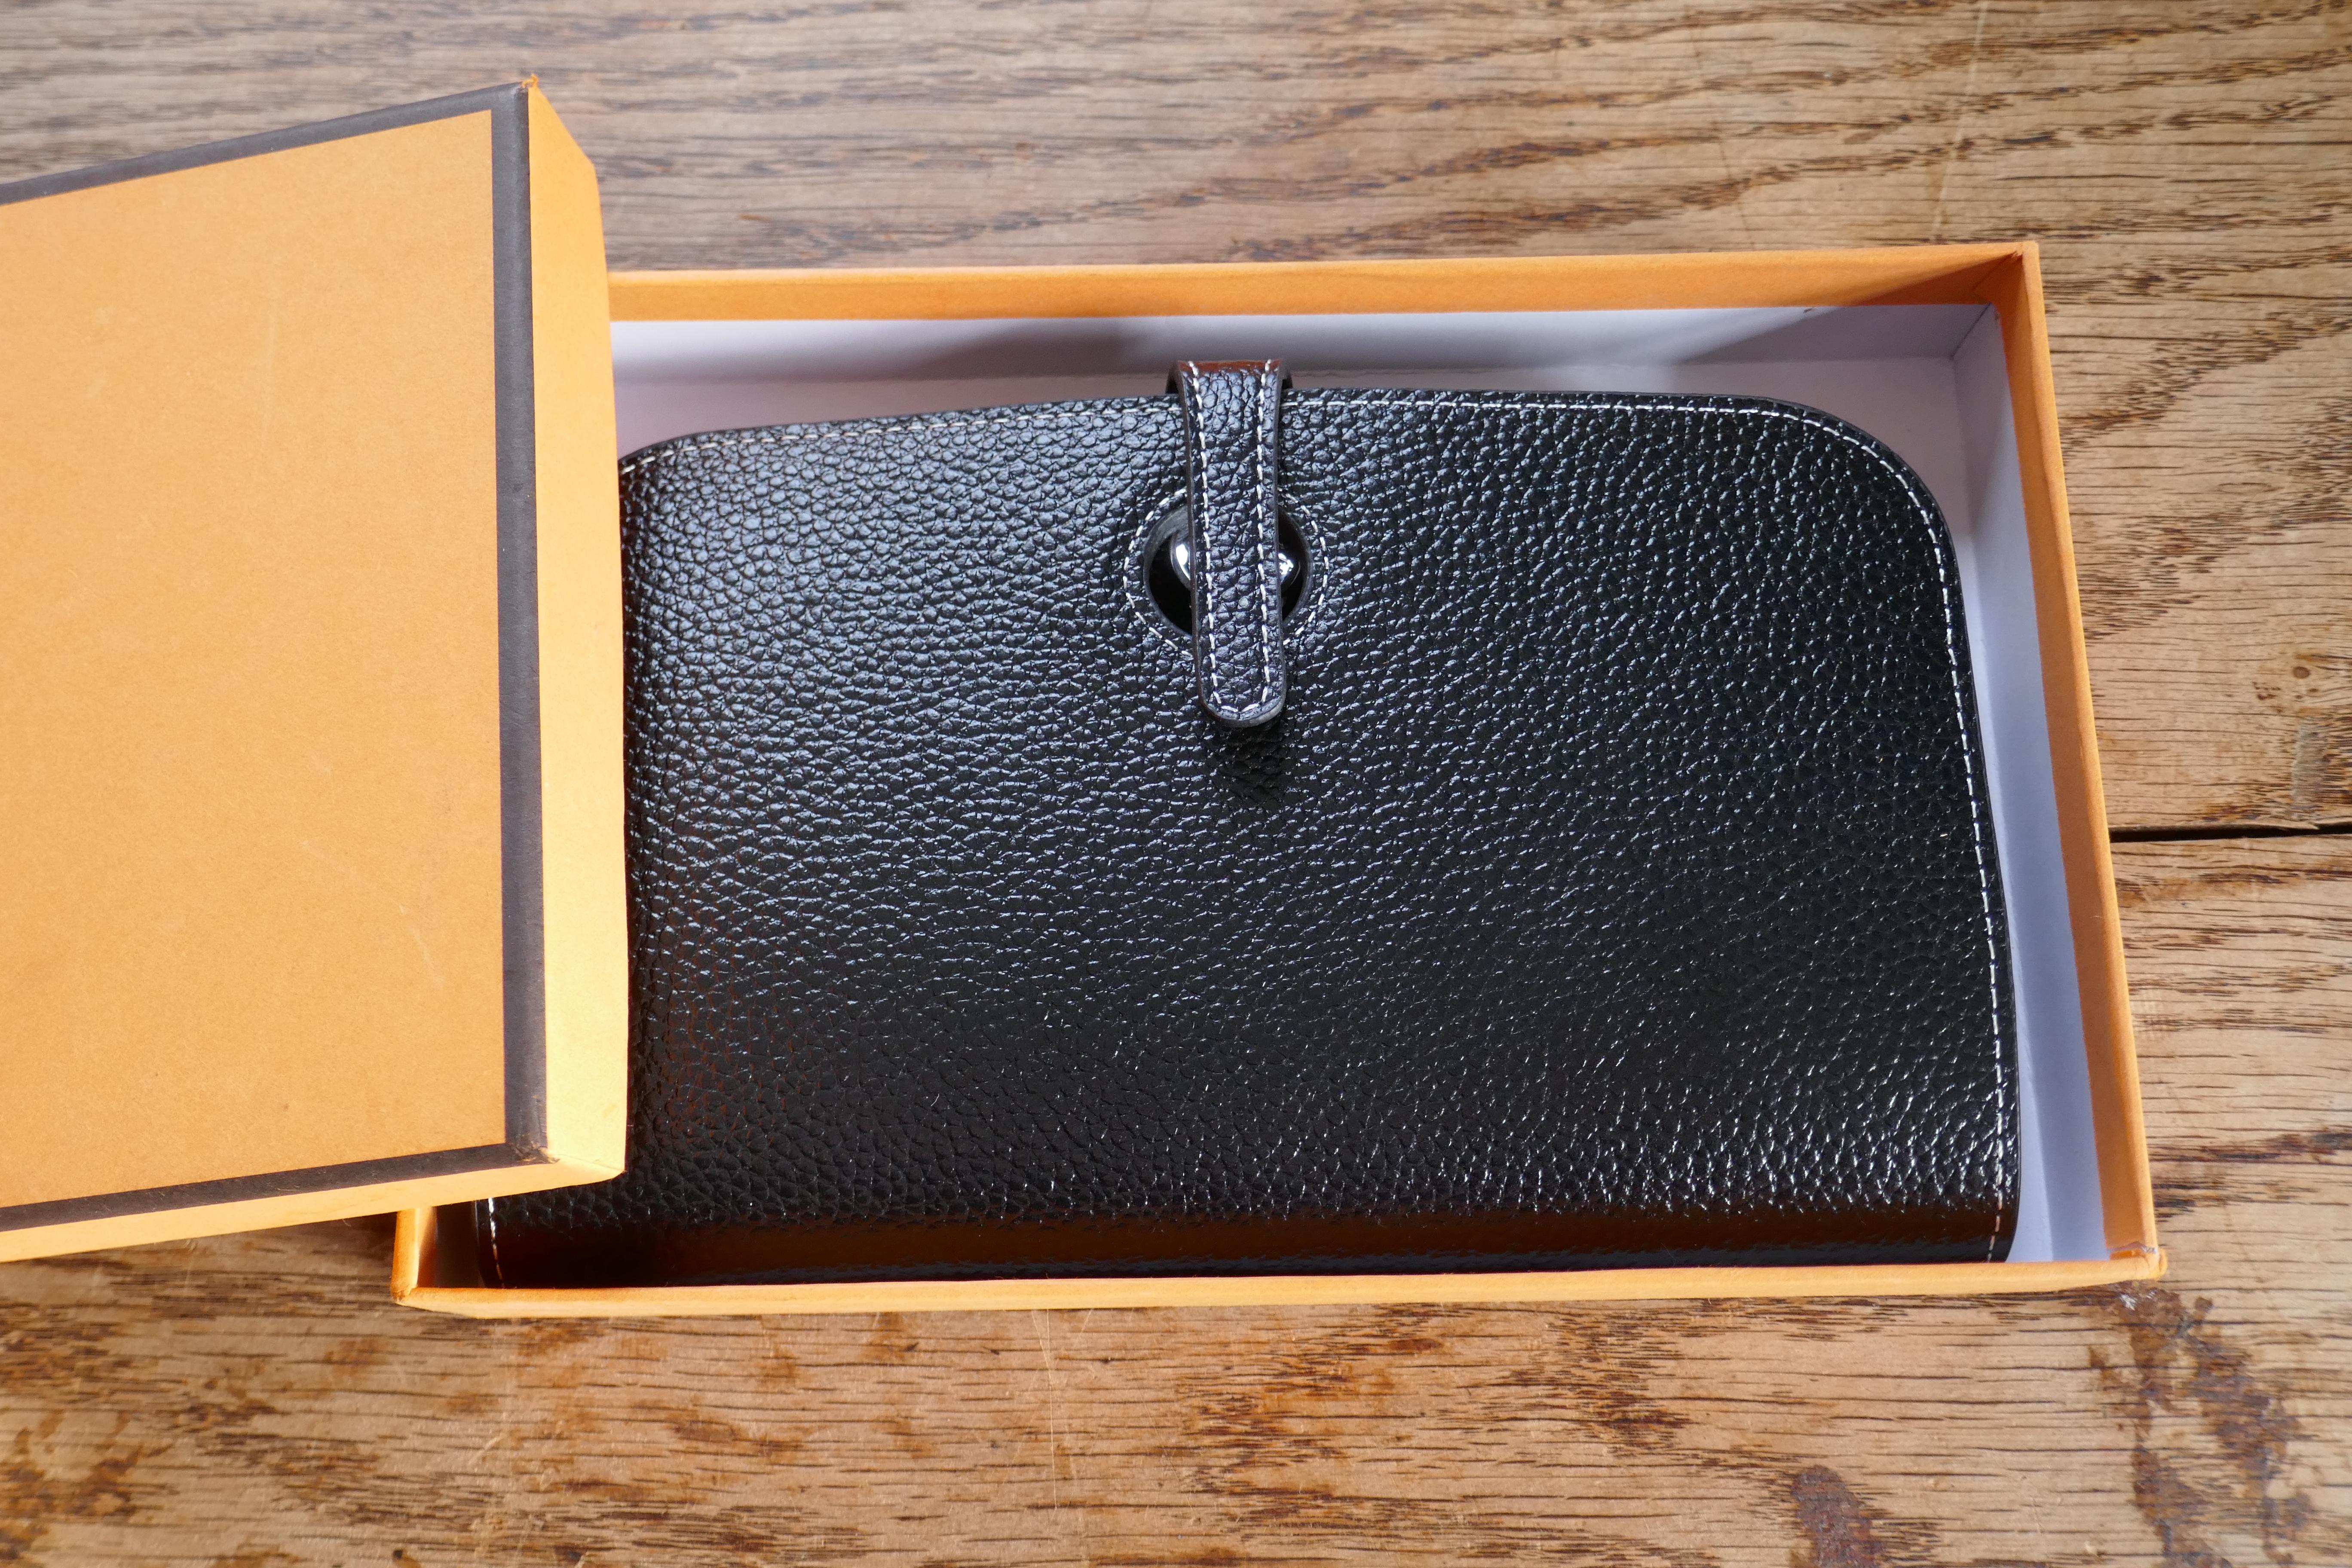 Ladies Hermes Shiny Black Togo Calfskin Dogon Duo Wallet with Purse  

This beautiful wallet is made from Togo Calfskin and has a silver coloured metal fastening with a leather slide tab, reading 'HERMÈS PARIS’  The wallet has 2 sections, the front